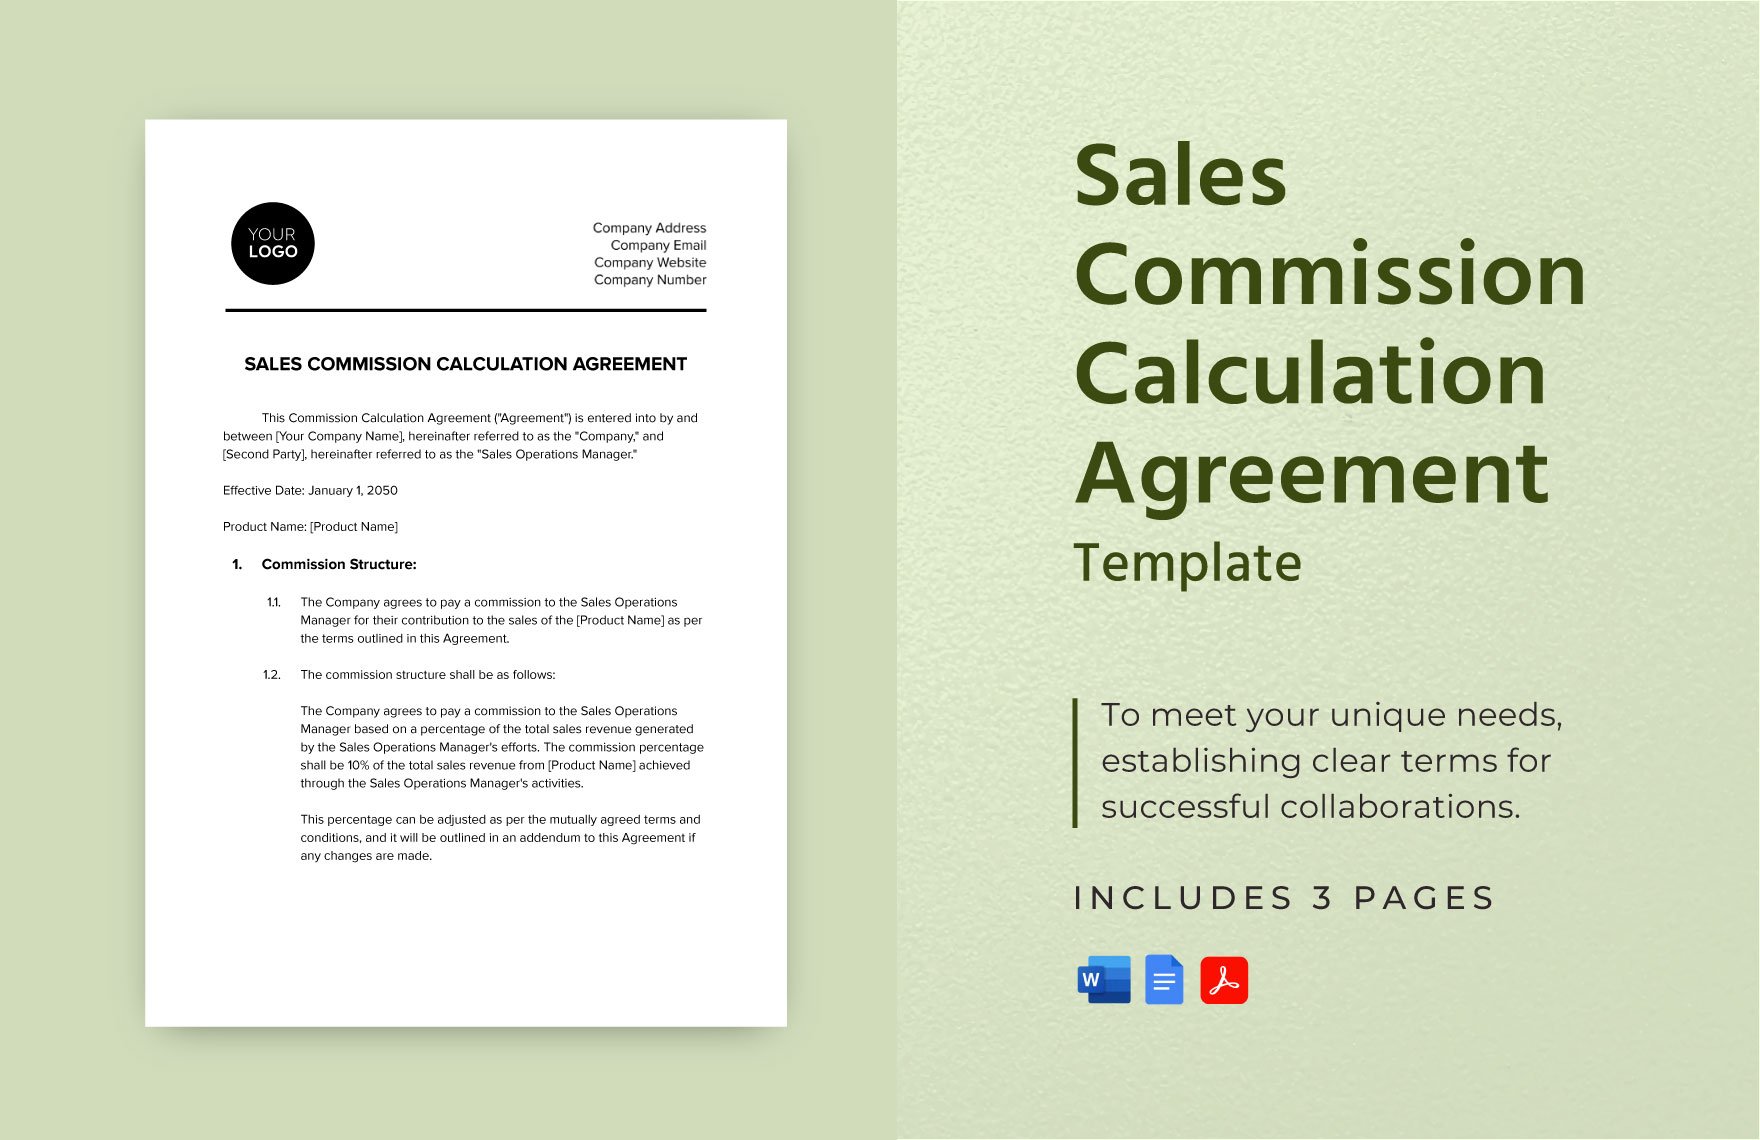 Sales Commission Calculation Agreement Template